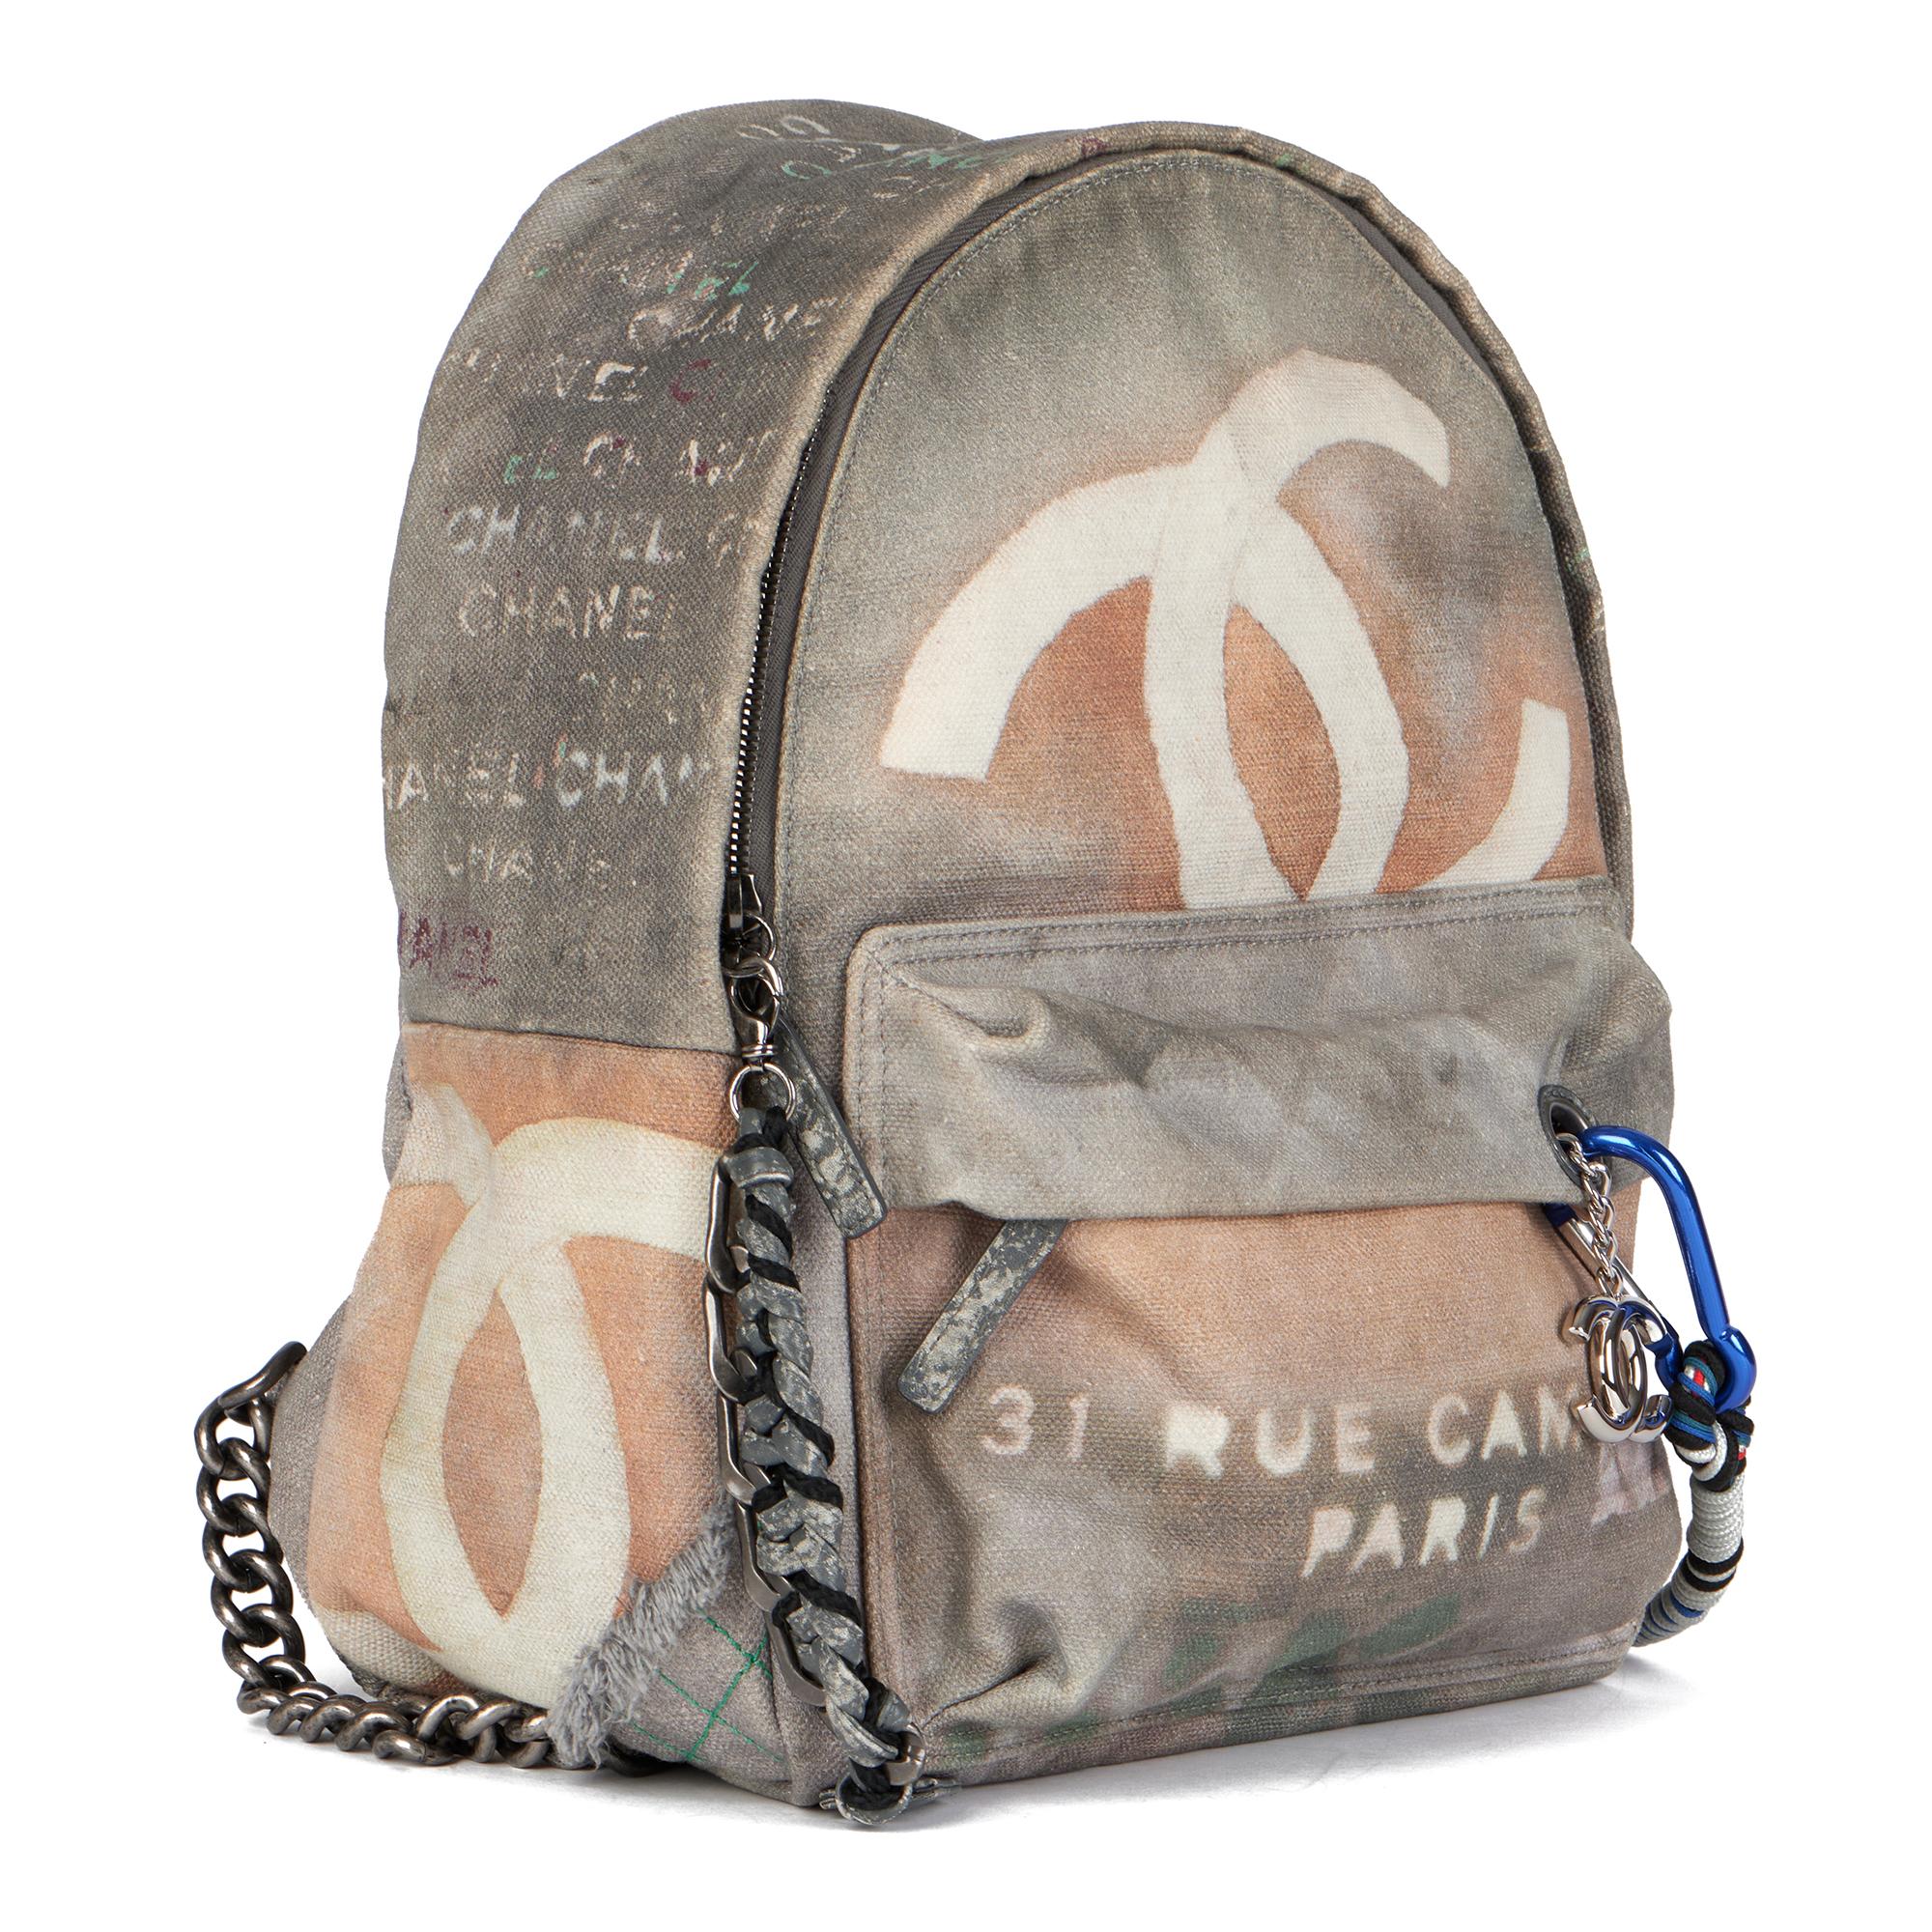 CHANEL
Grey Painted Canvas Medium Graffiti Backpack

Xupes Reference: HB3992
Serial Number: 19434766
Age (Circa): 2014
Accompanied By: Chanel Dust Bag, Box
Authenticity Details: Serial Sticker (Made in Italy) 
Gender: Unisex
Type: Backpack

Colour: